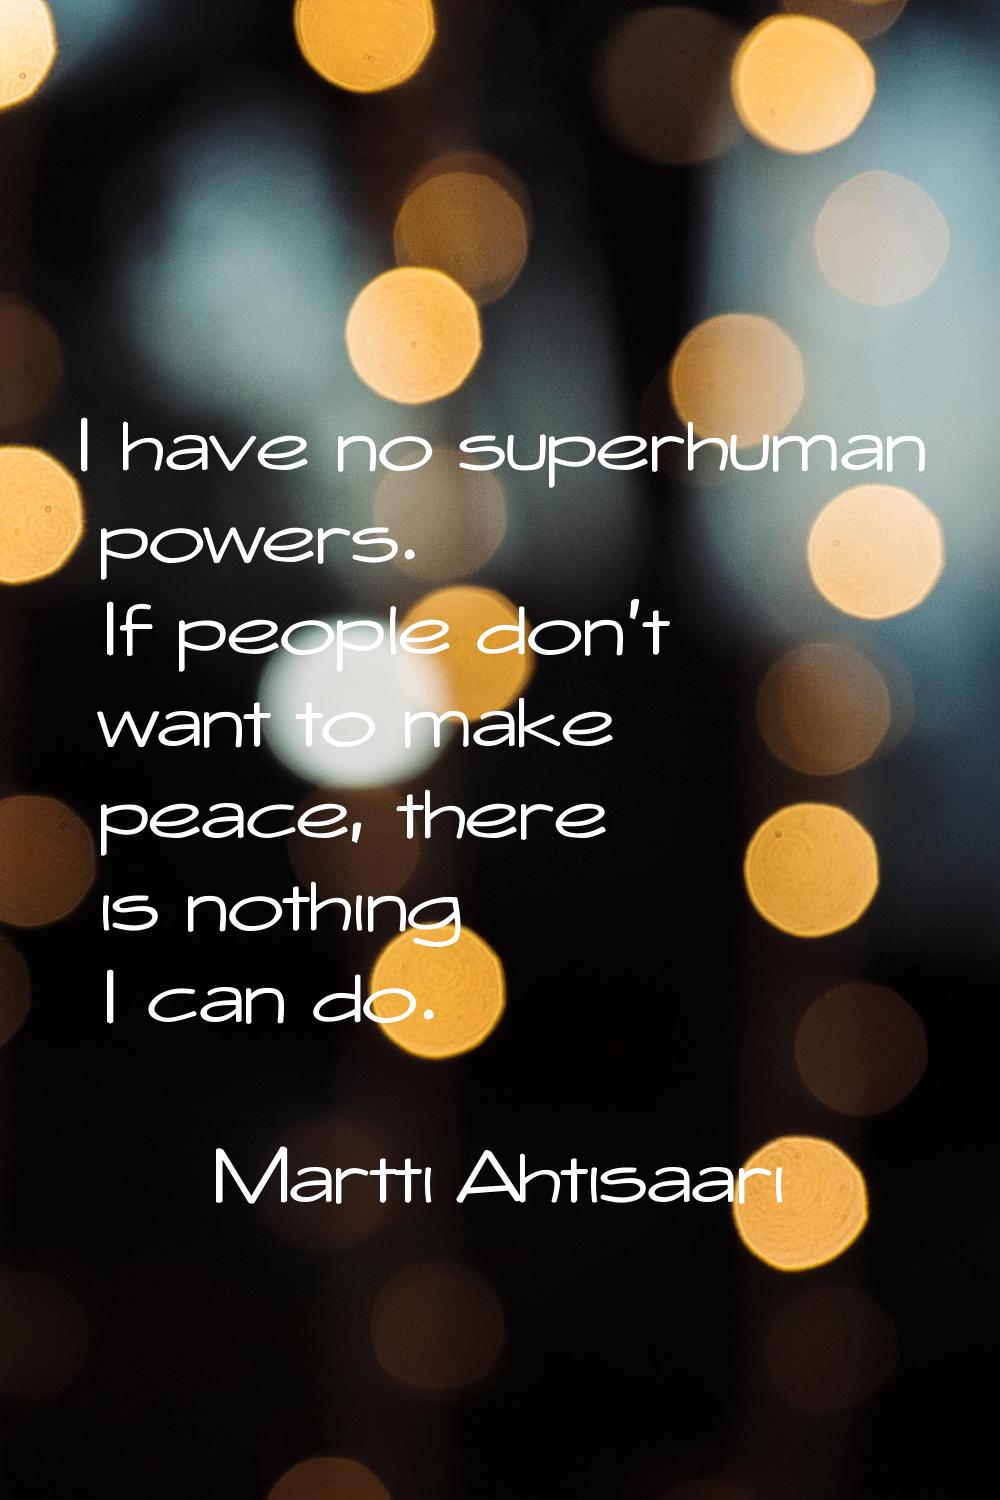 I have no superhuman powers. If people don't want to make peace, there is nothing I can do.